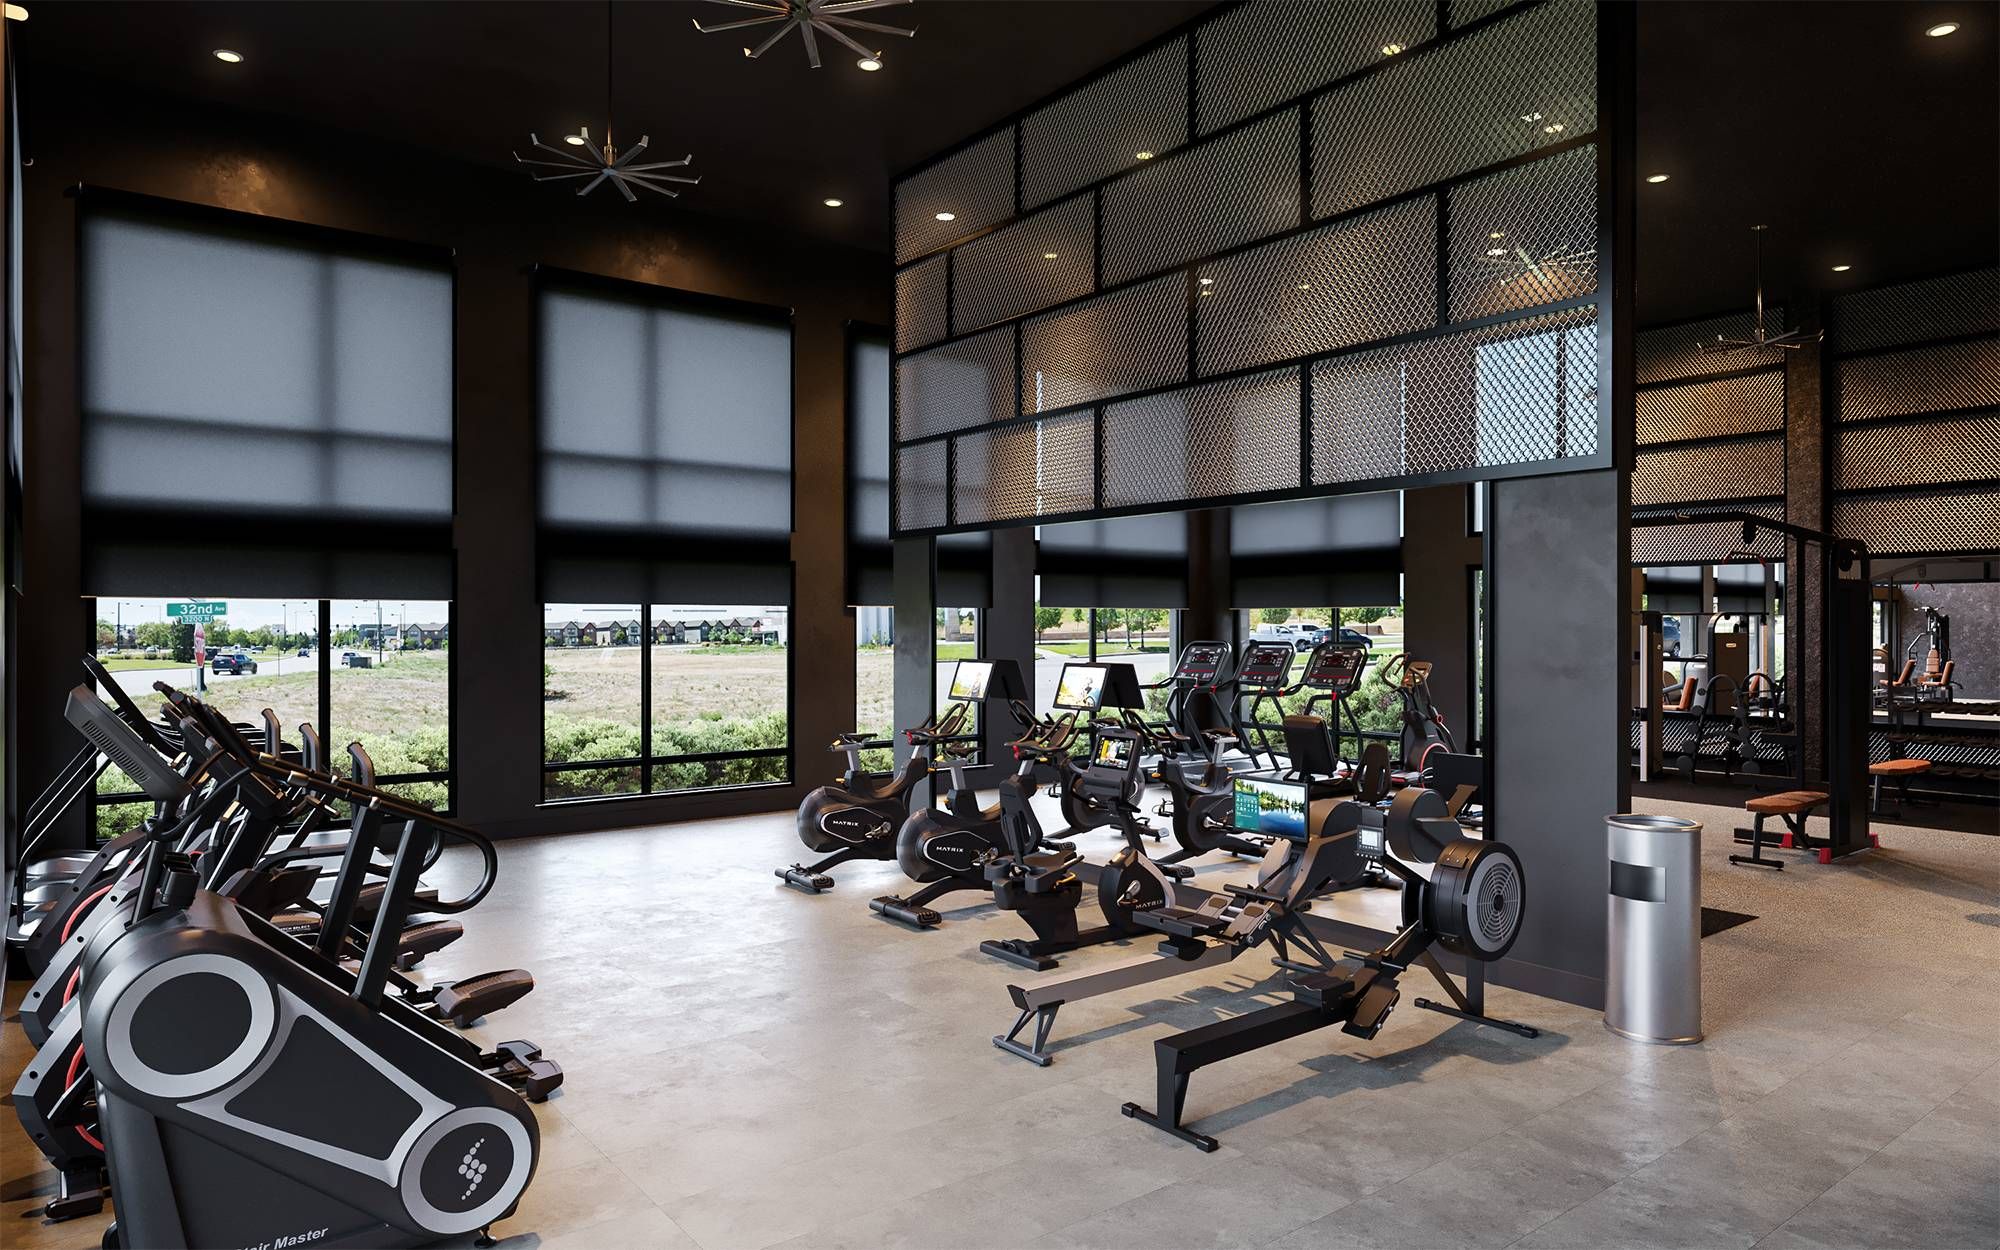 Solana Central Park rendering of luxury fitness center with cardio equipment